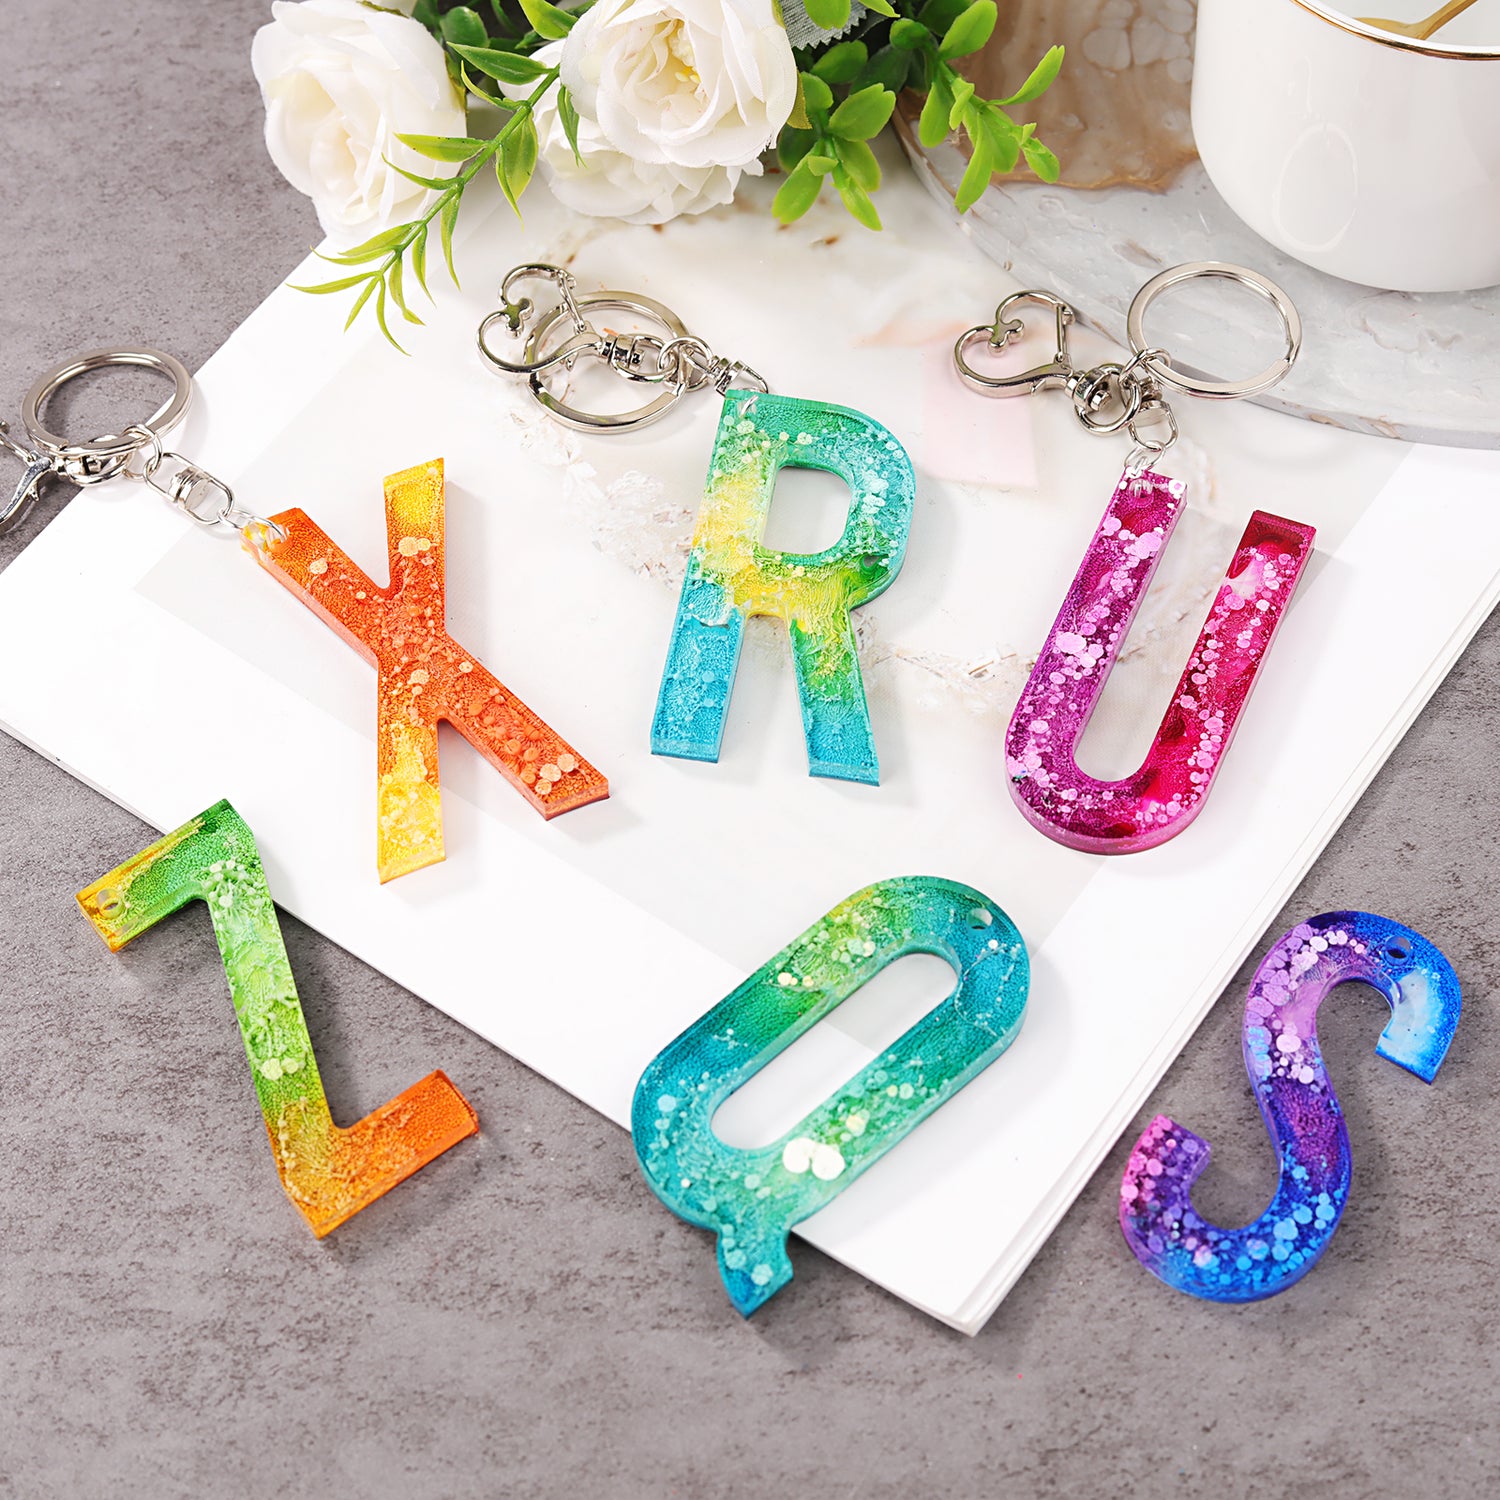 Alphabet Resin Keychain Molds, Anezus Resin Letter Molds Silicone